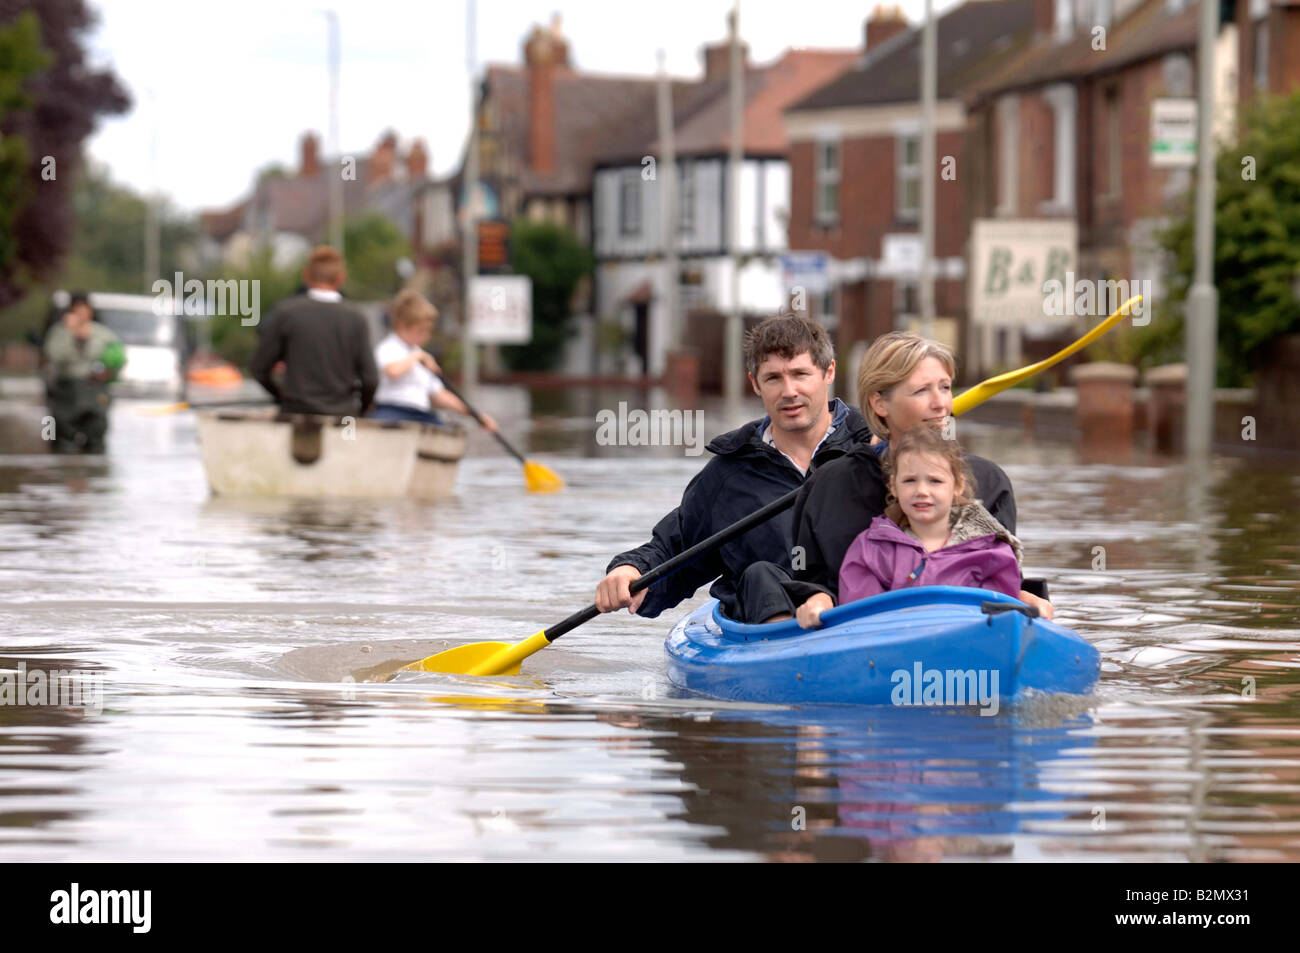 A FAMILY USE A CANOE TO NAVIGATE FLOODWATER IN TEWKESBURY ROAD SANDHURST GLOUCESTER UK JULY 2007 Stock Photo